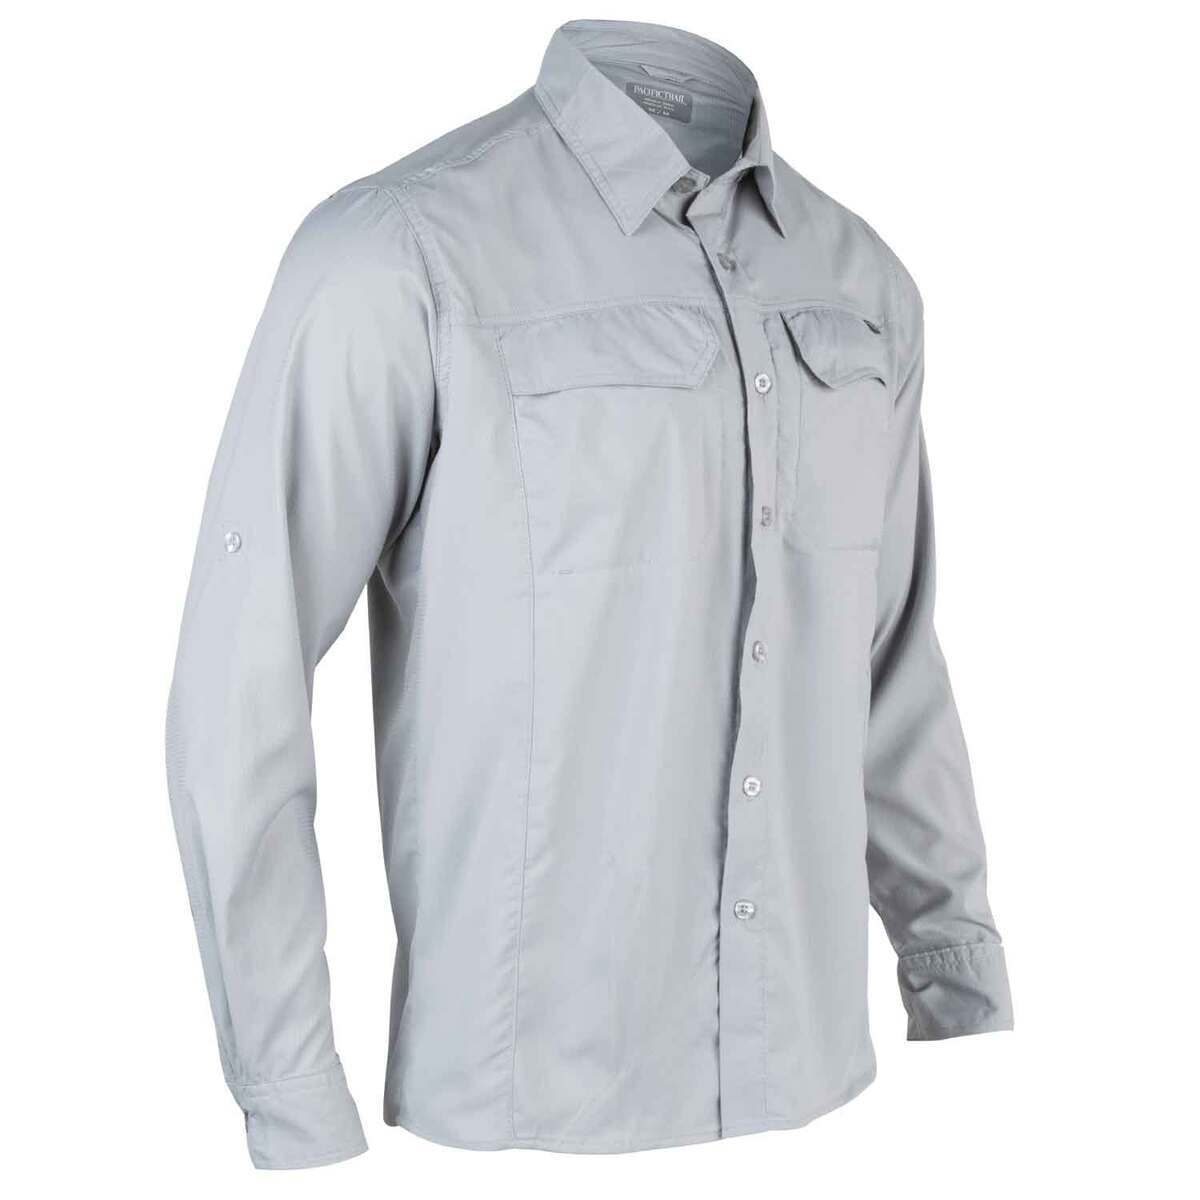 Pacific Trail Men's Total Performance Long Sleeve Hiking Shirt - Brick House Red M by Sportsman's Warehouse